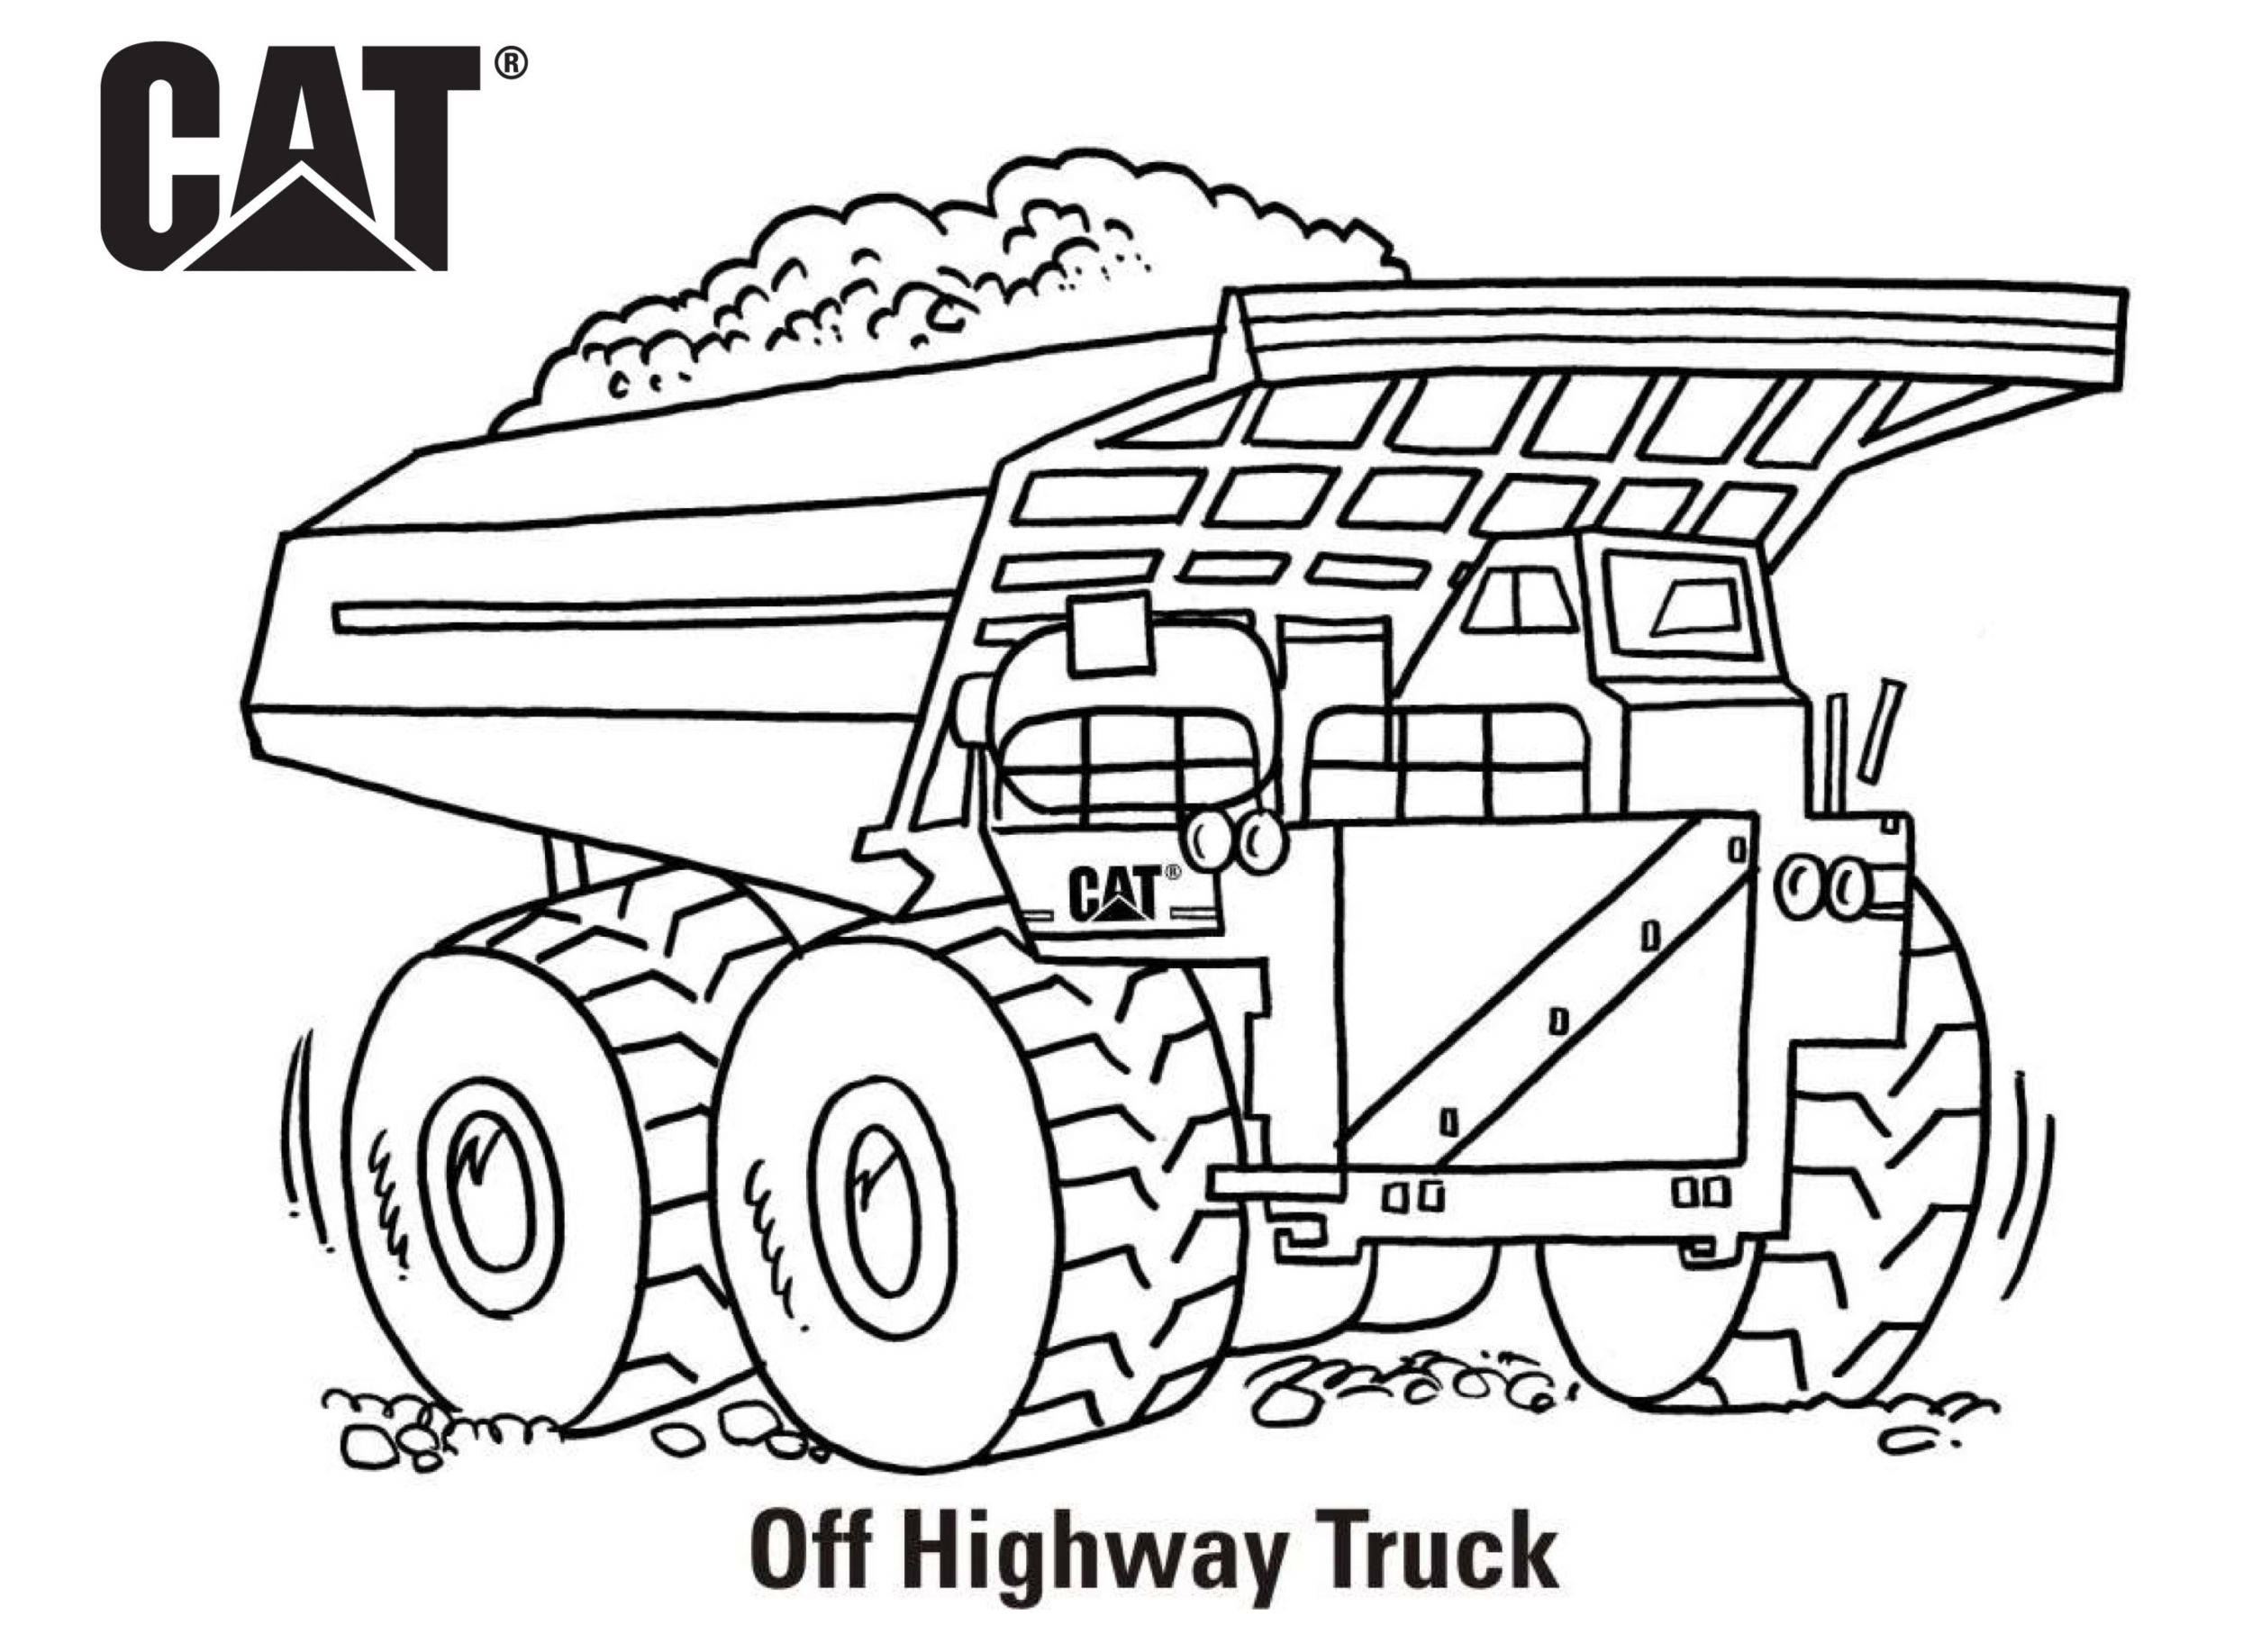 Download Coloring Pages | Cat | Caterpillar